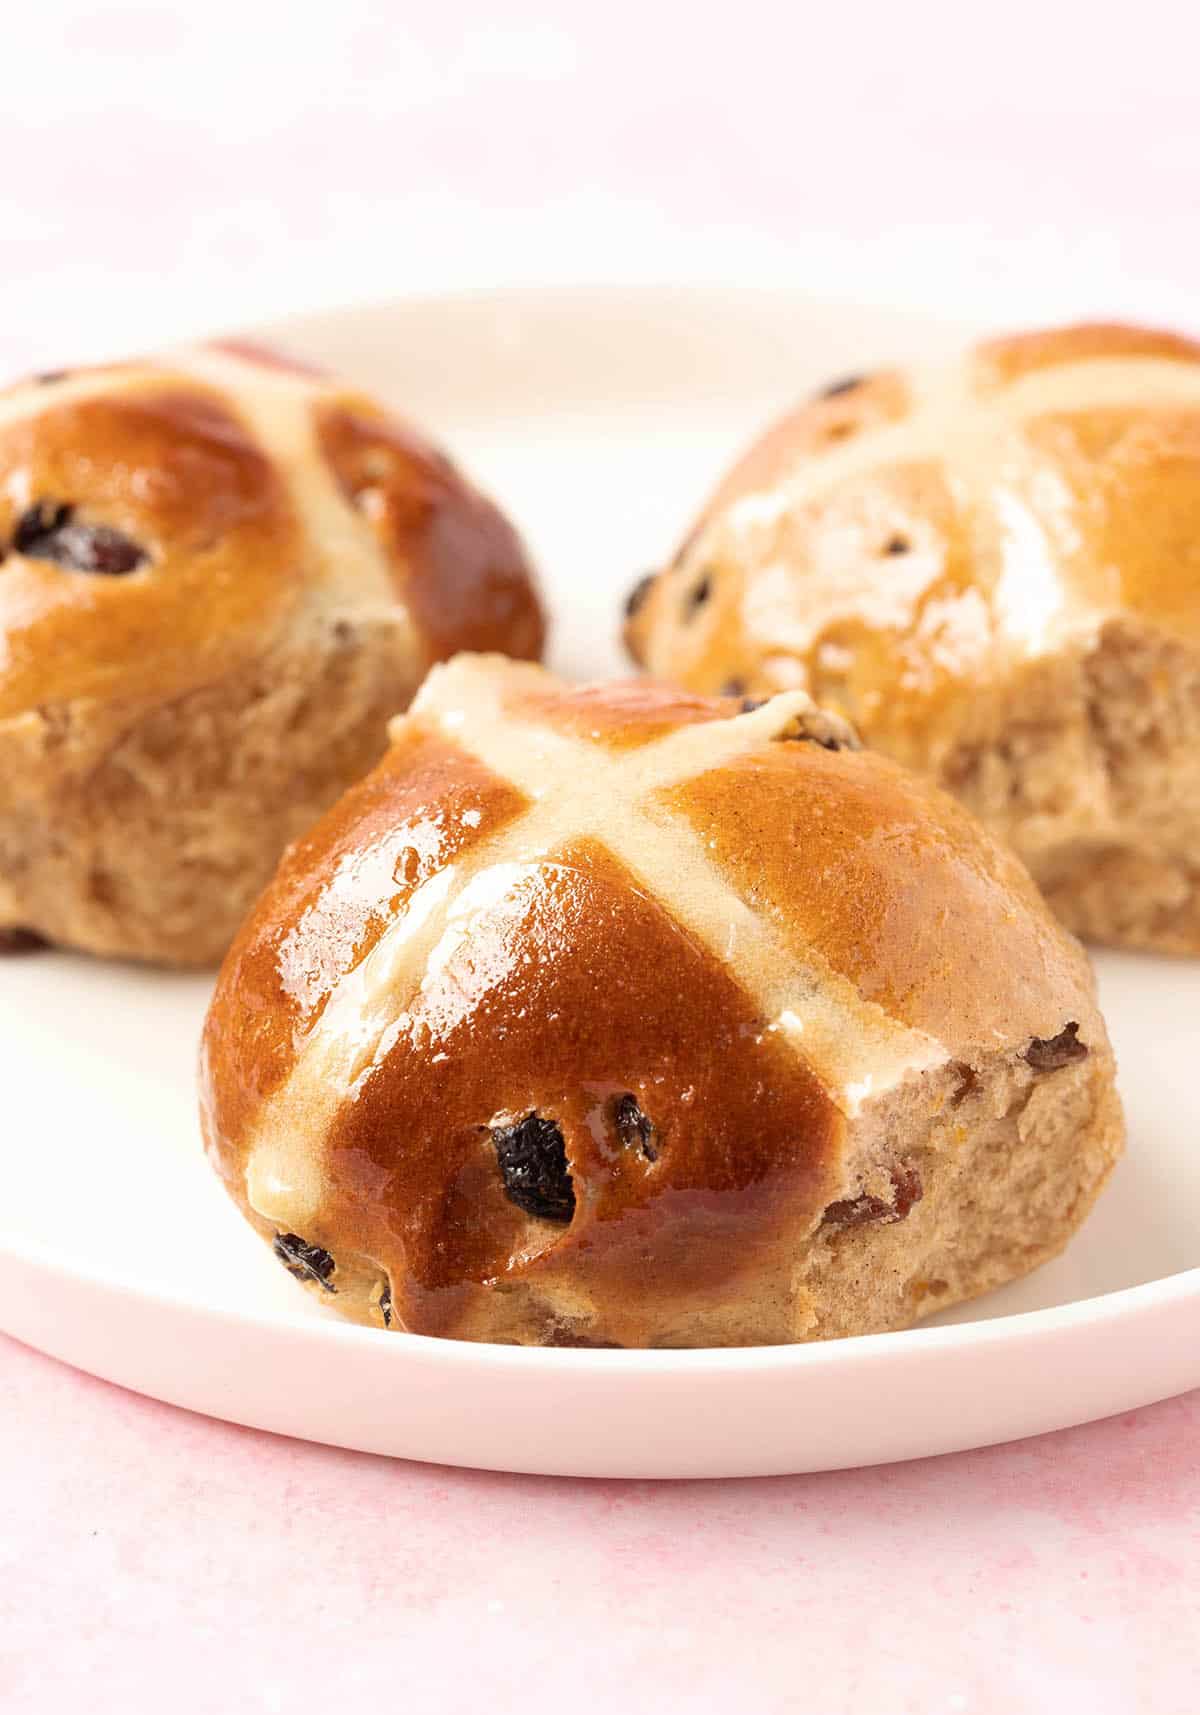 A plate of homemade Hot Cross Buns on a pink backdrop.